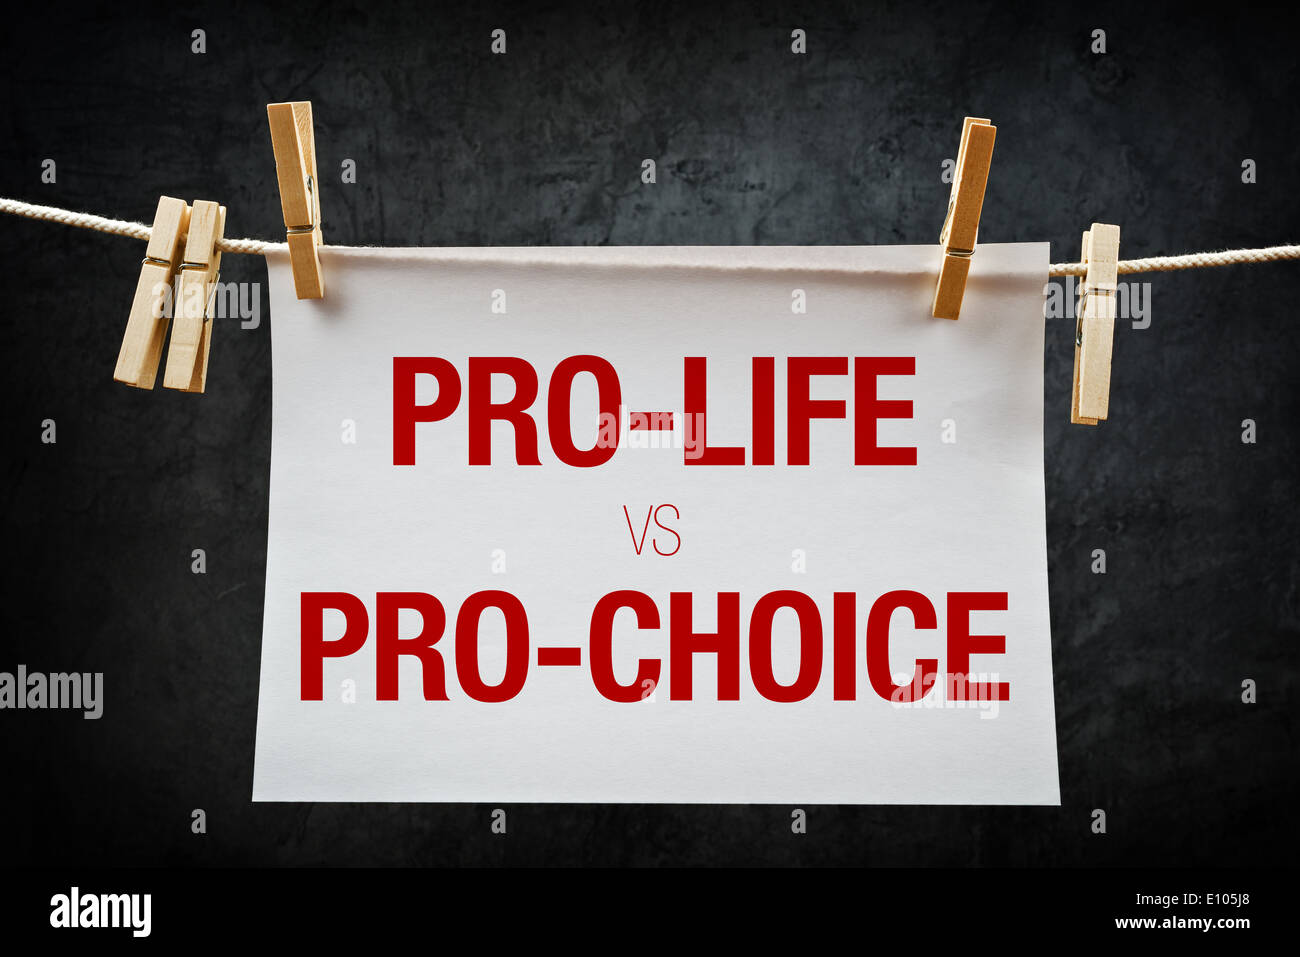 Pro-life vs pro-choice, female right on abortion concept Stock Photo